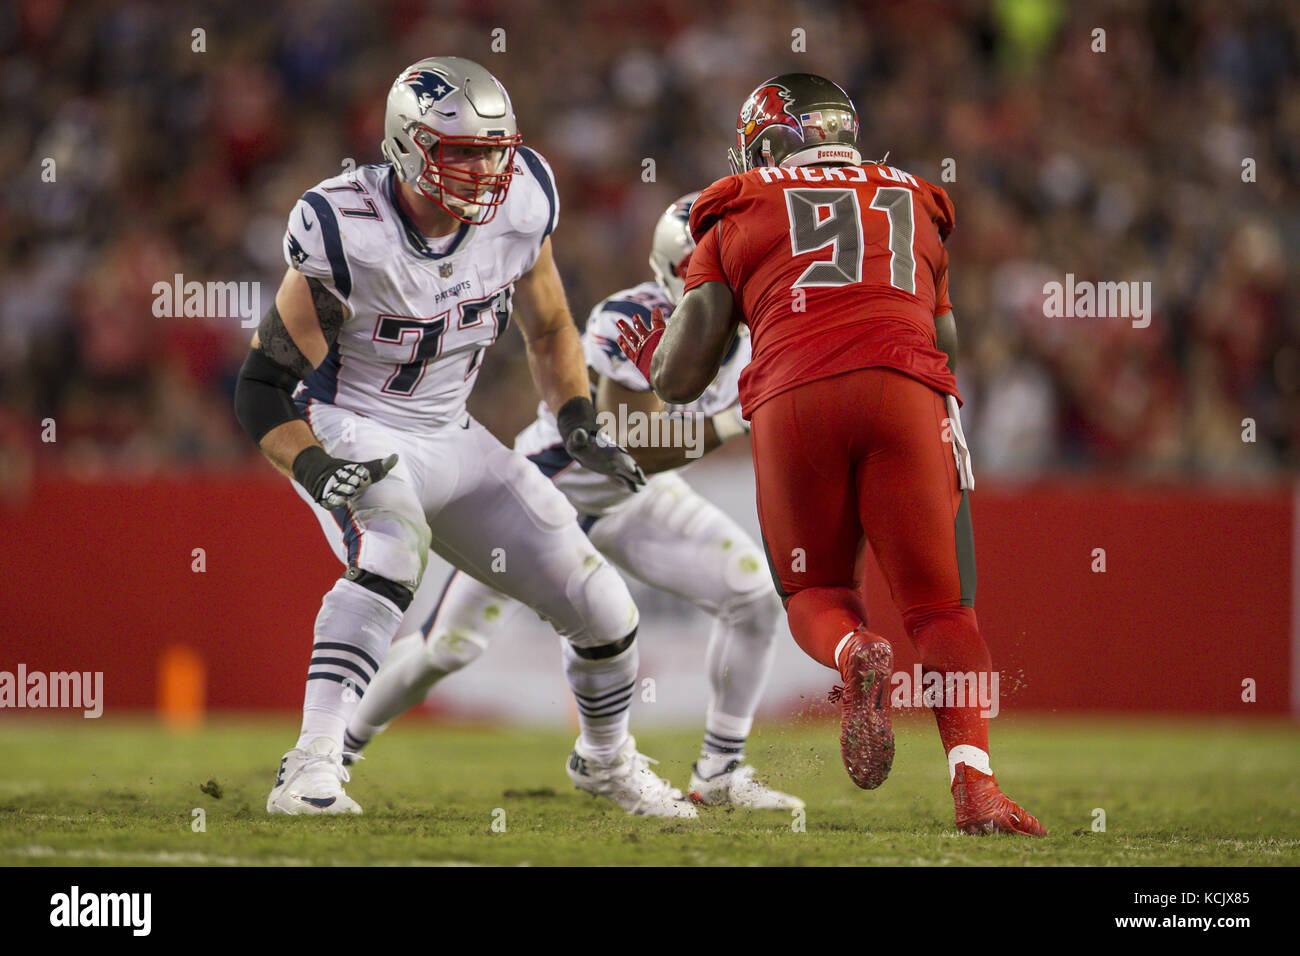 Tampa, Florida, USA. 5th Oct, 2017. New England Patriots offensive tackle Nate Solder (77) looks to block Tampa Bay Buccaneers defensive end Robert Ayers (91) during the game on Thursday October 5, 2017 at Raymond James Stadium in Tampa, Florida. Credit: Travis Pendergrass/ZUMA Wire/Alamy Live News Stock Photo